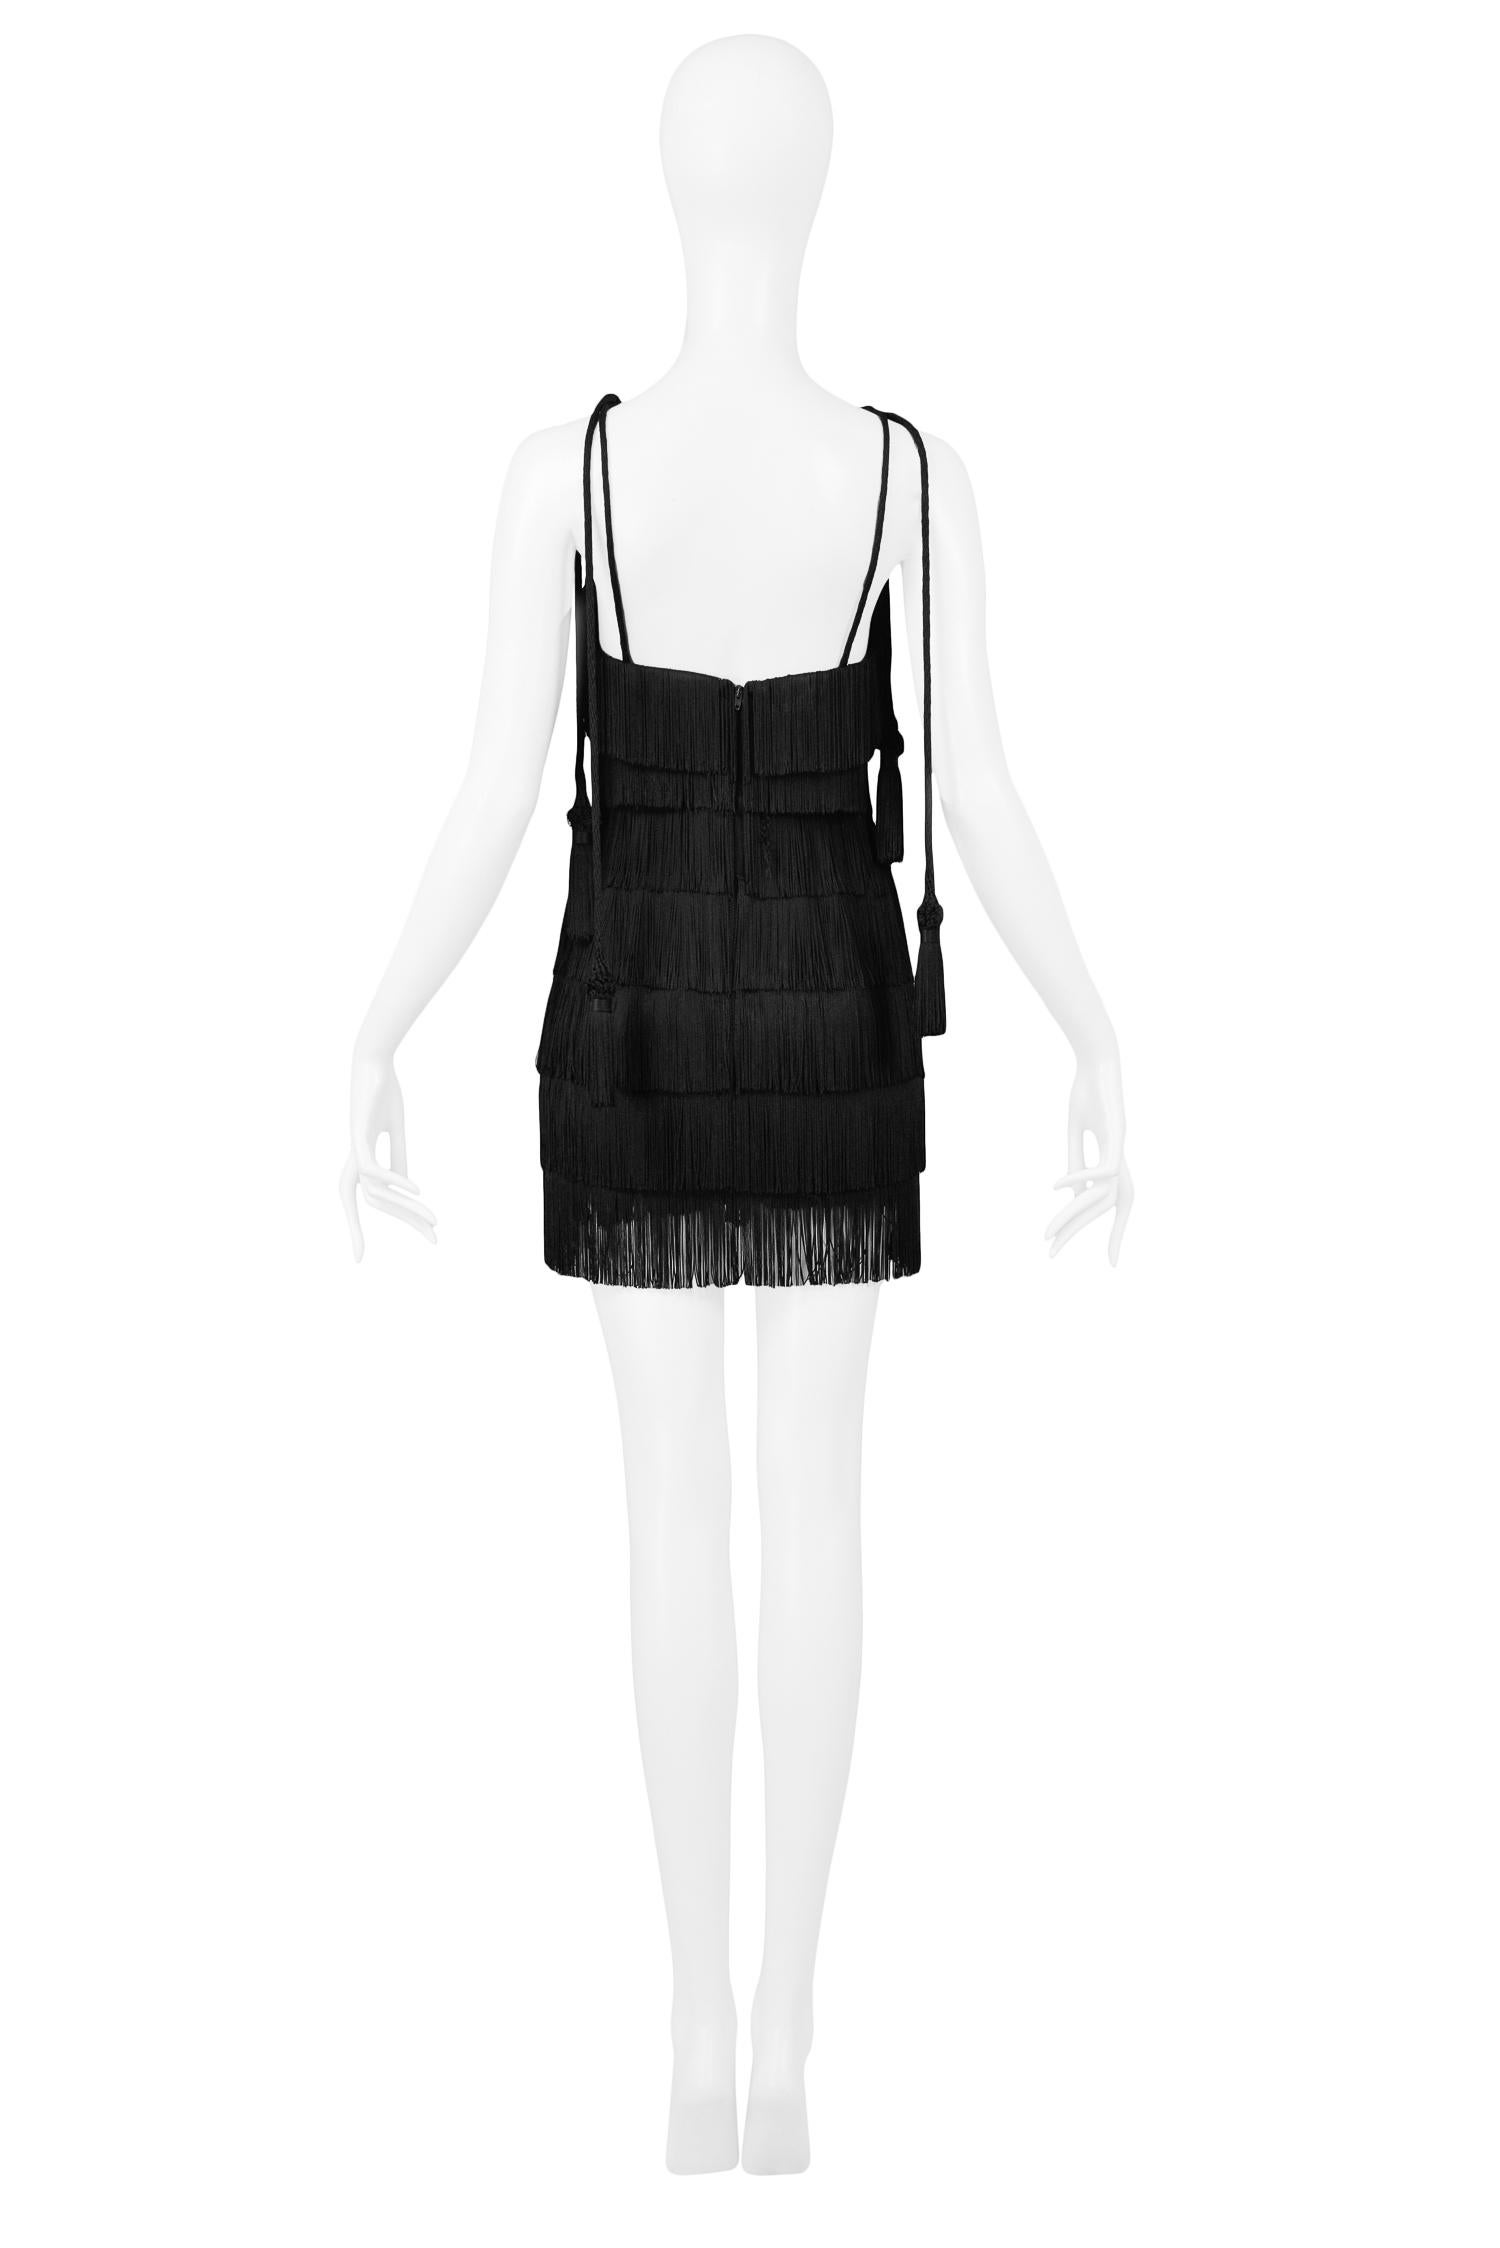 Women's Vintage Moschino Black Fringed Flapper Dress with Tassels 1990